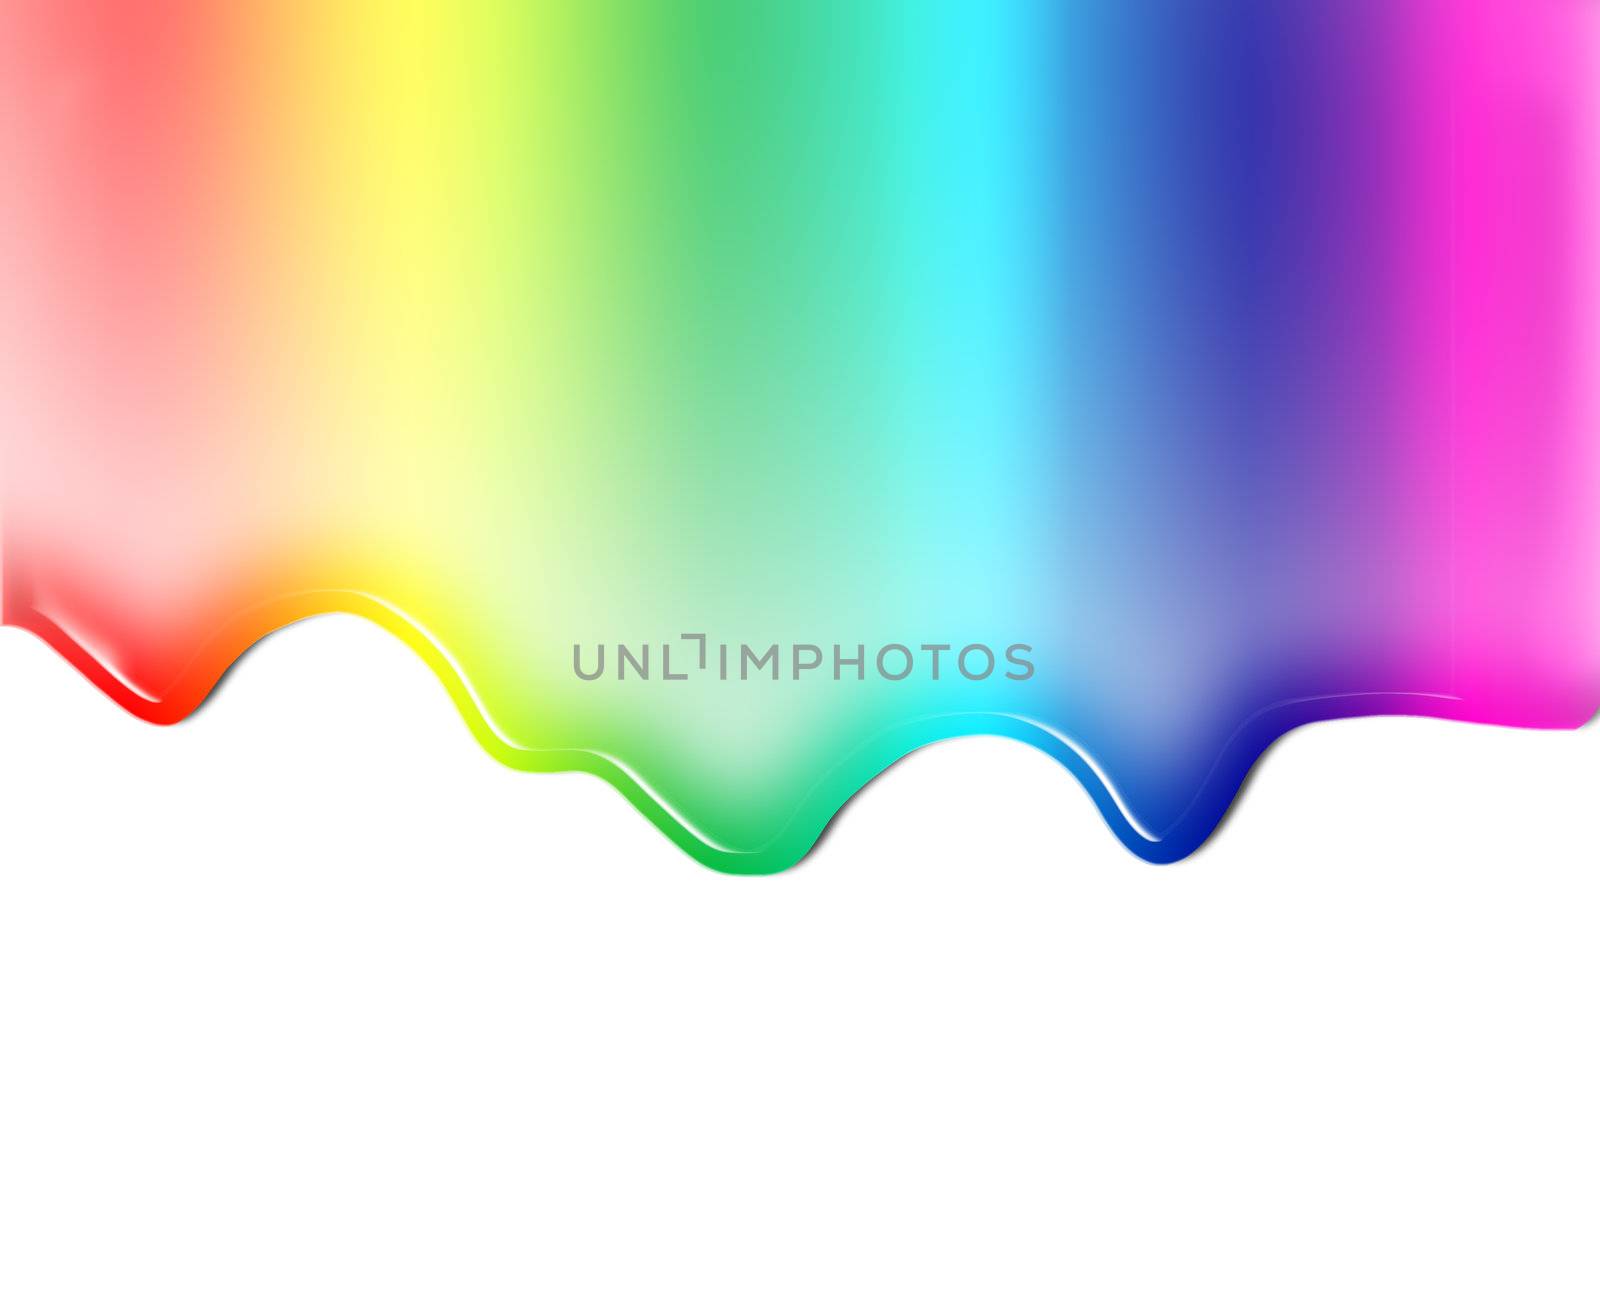 Illustration of liquid or paint colors isolated in white